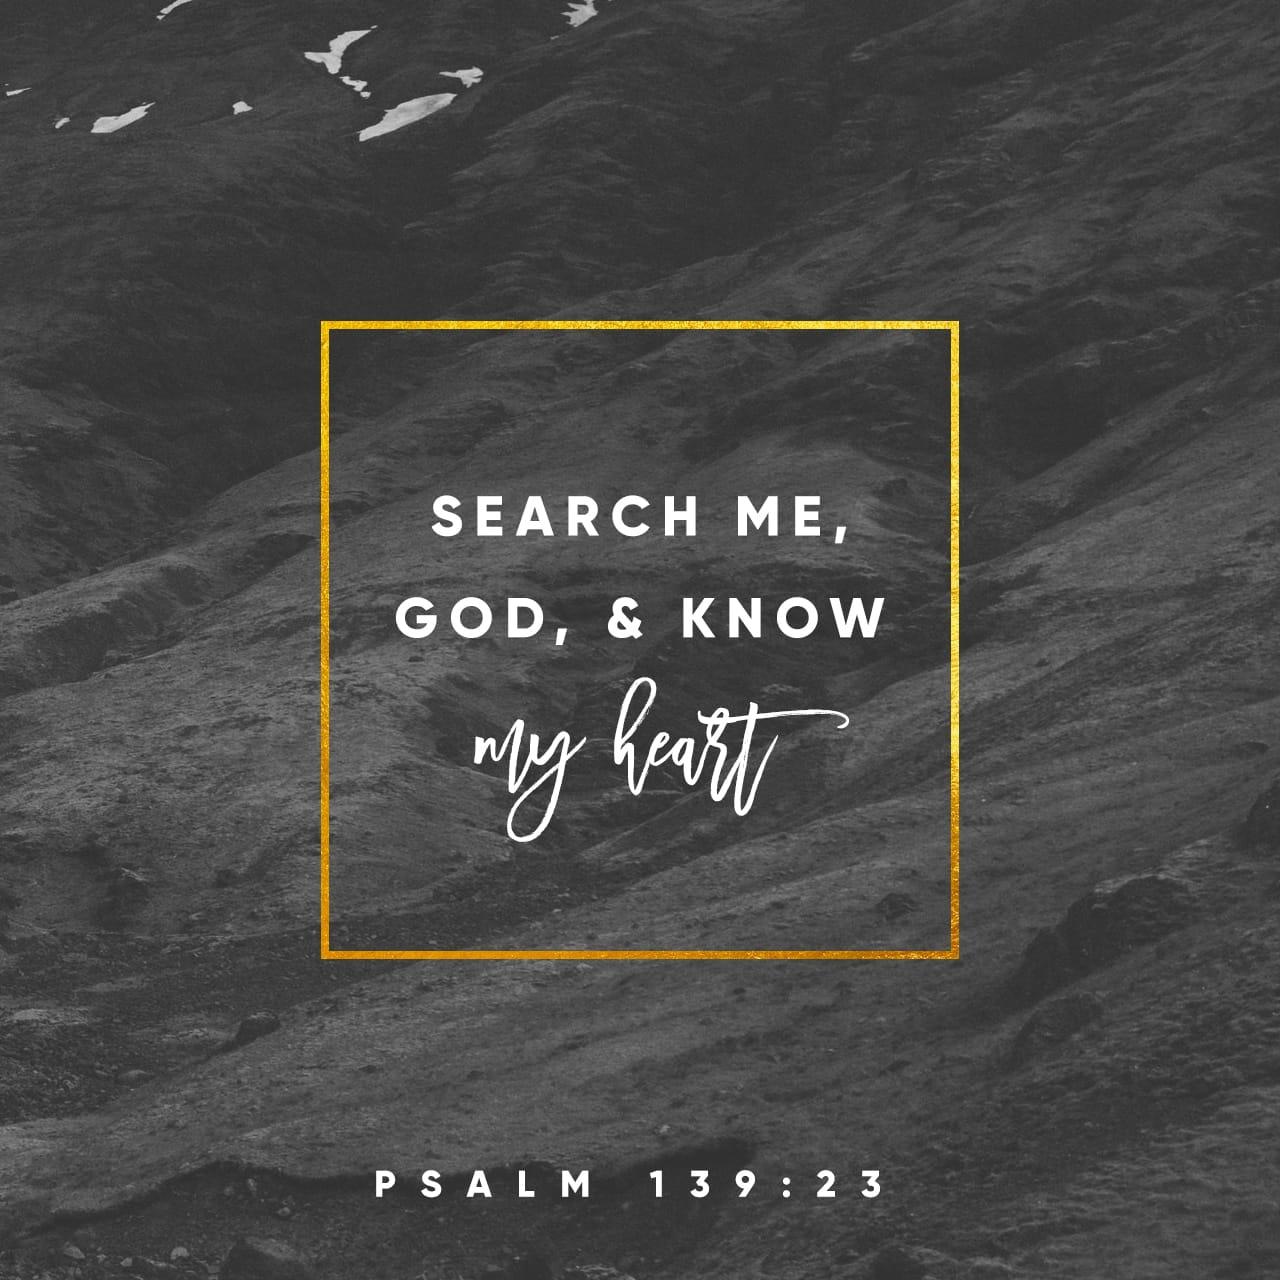 Bible verse of the day - Day 87 - image 2417 (Psalms 139:23-24)